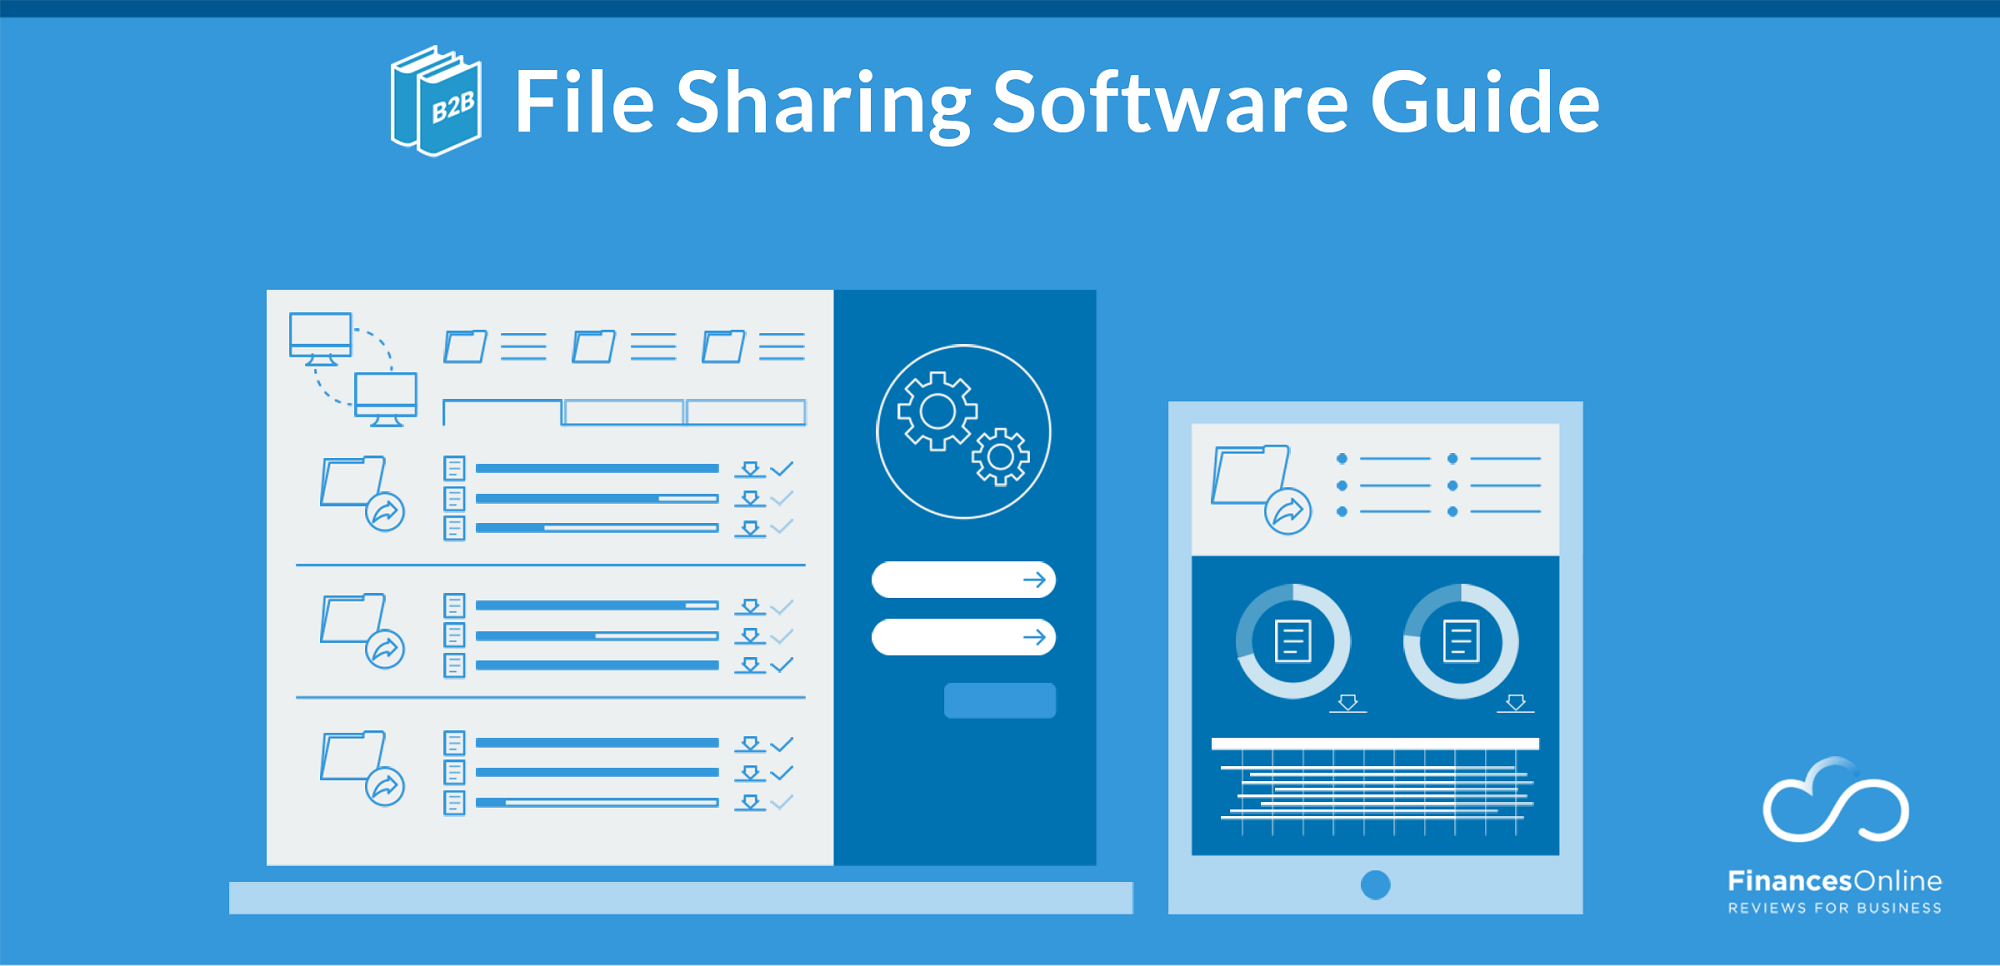 Search online for popular and reliable file sharing programs.
Read reviews and compare features to find the best alternative.